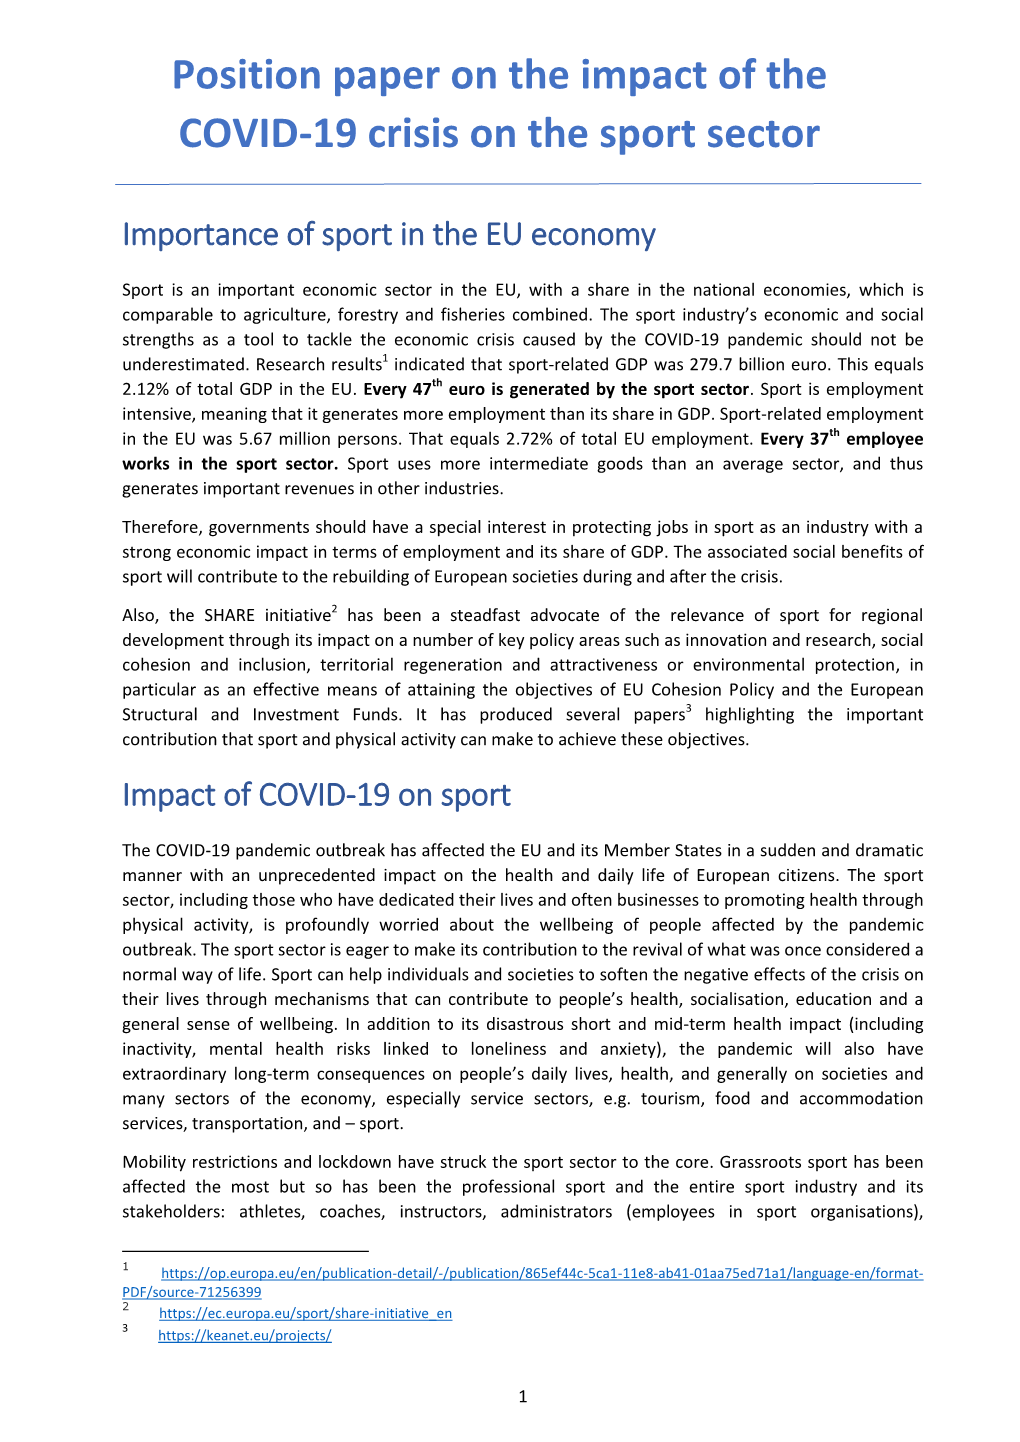 Position Paper on the Impact of the COVID-19 Crisis on the Sport Sector